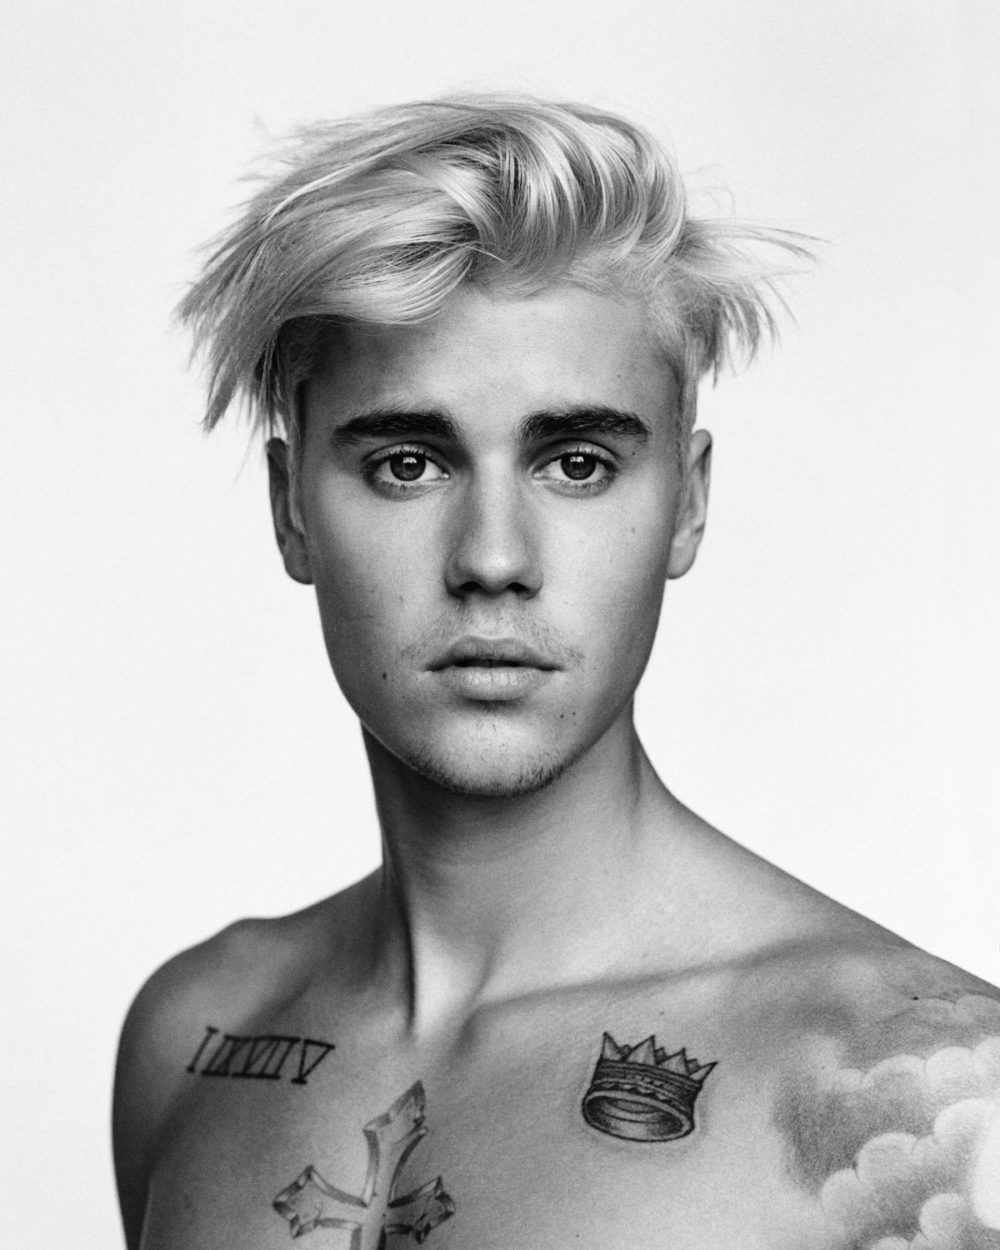 justin-bieber-interview-the-singer-opens-up-about-the-pressure-of-fame-body-image-1447177675